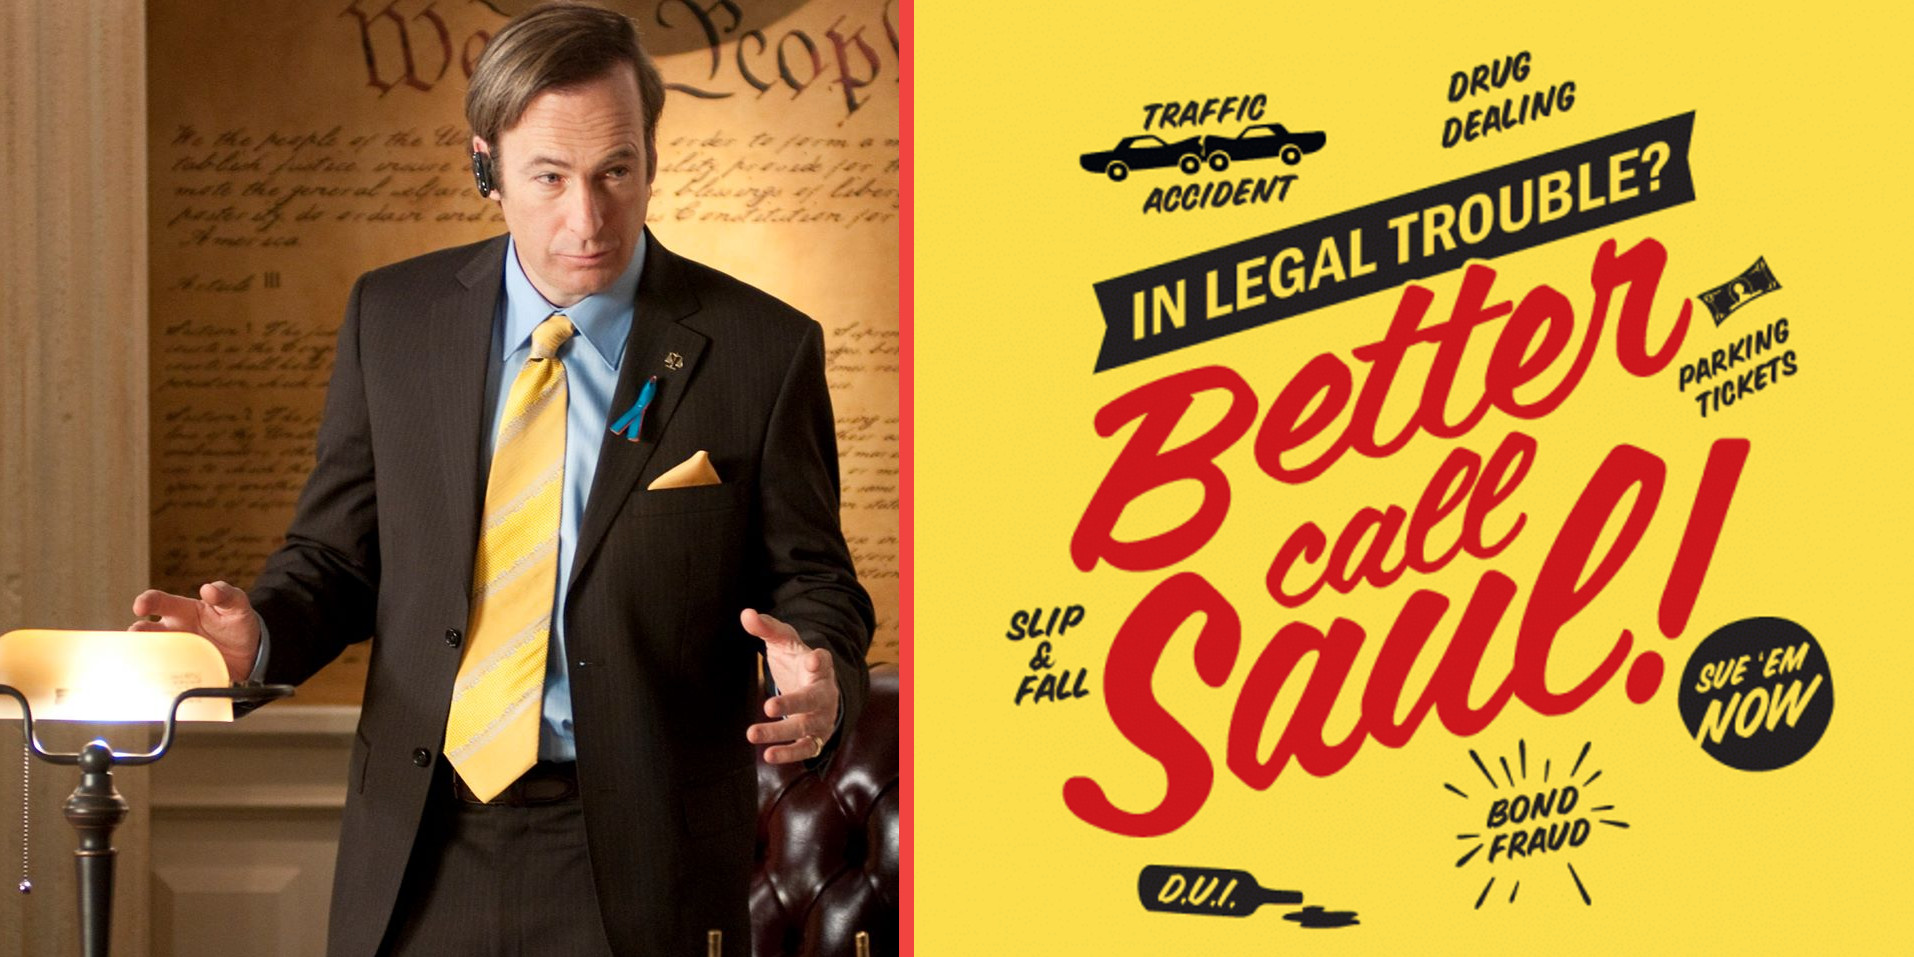 HD Better Call Saul Wallpapers and Photos | HD TV Wallpapers